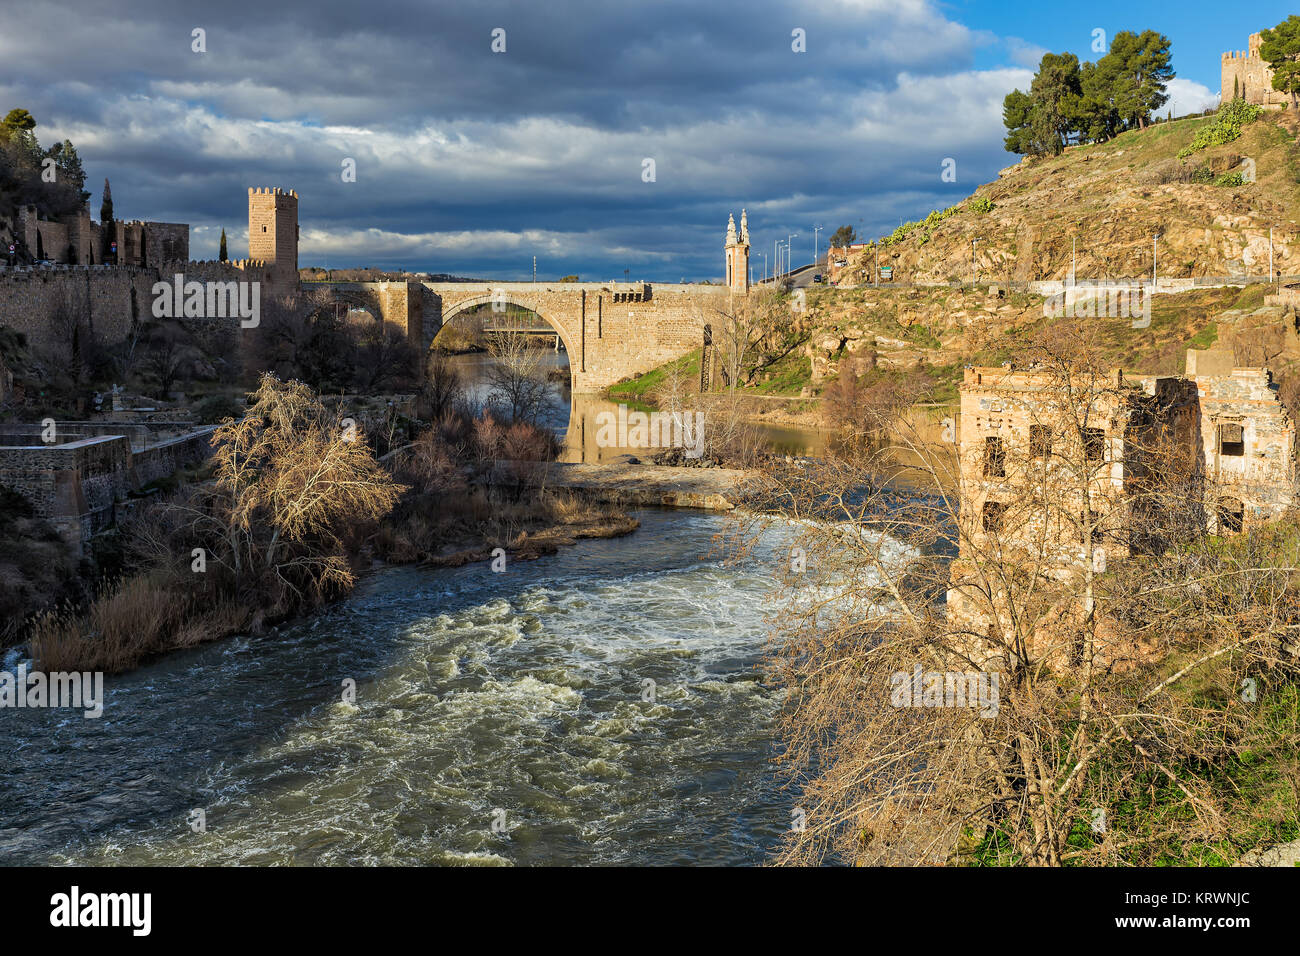 View of the Tagus river in Toledo. Spain. Stock Photo